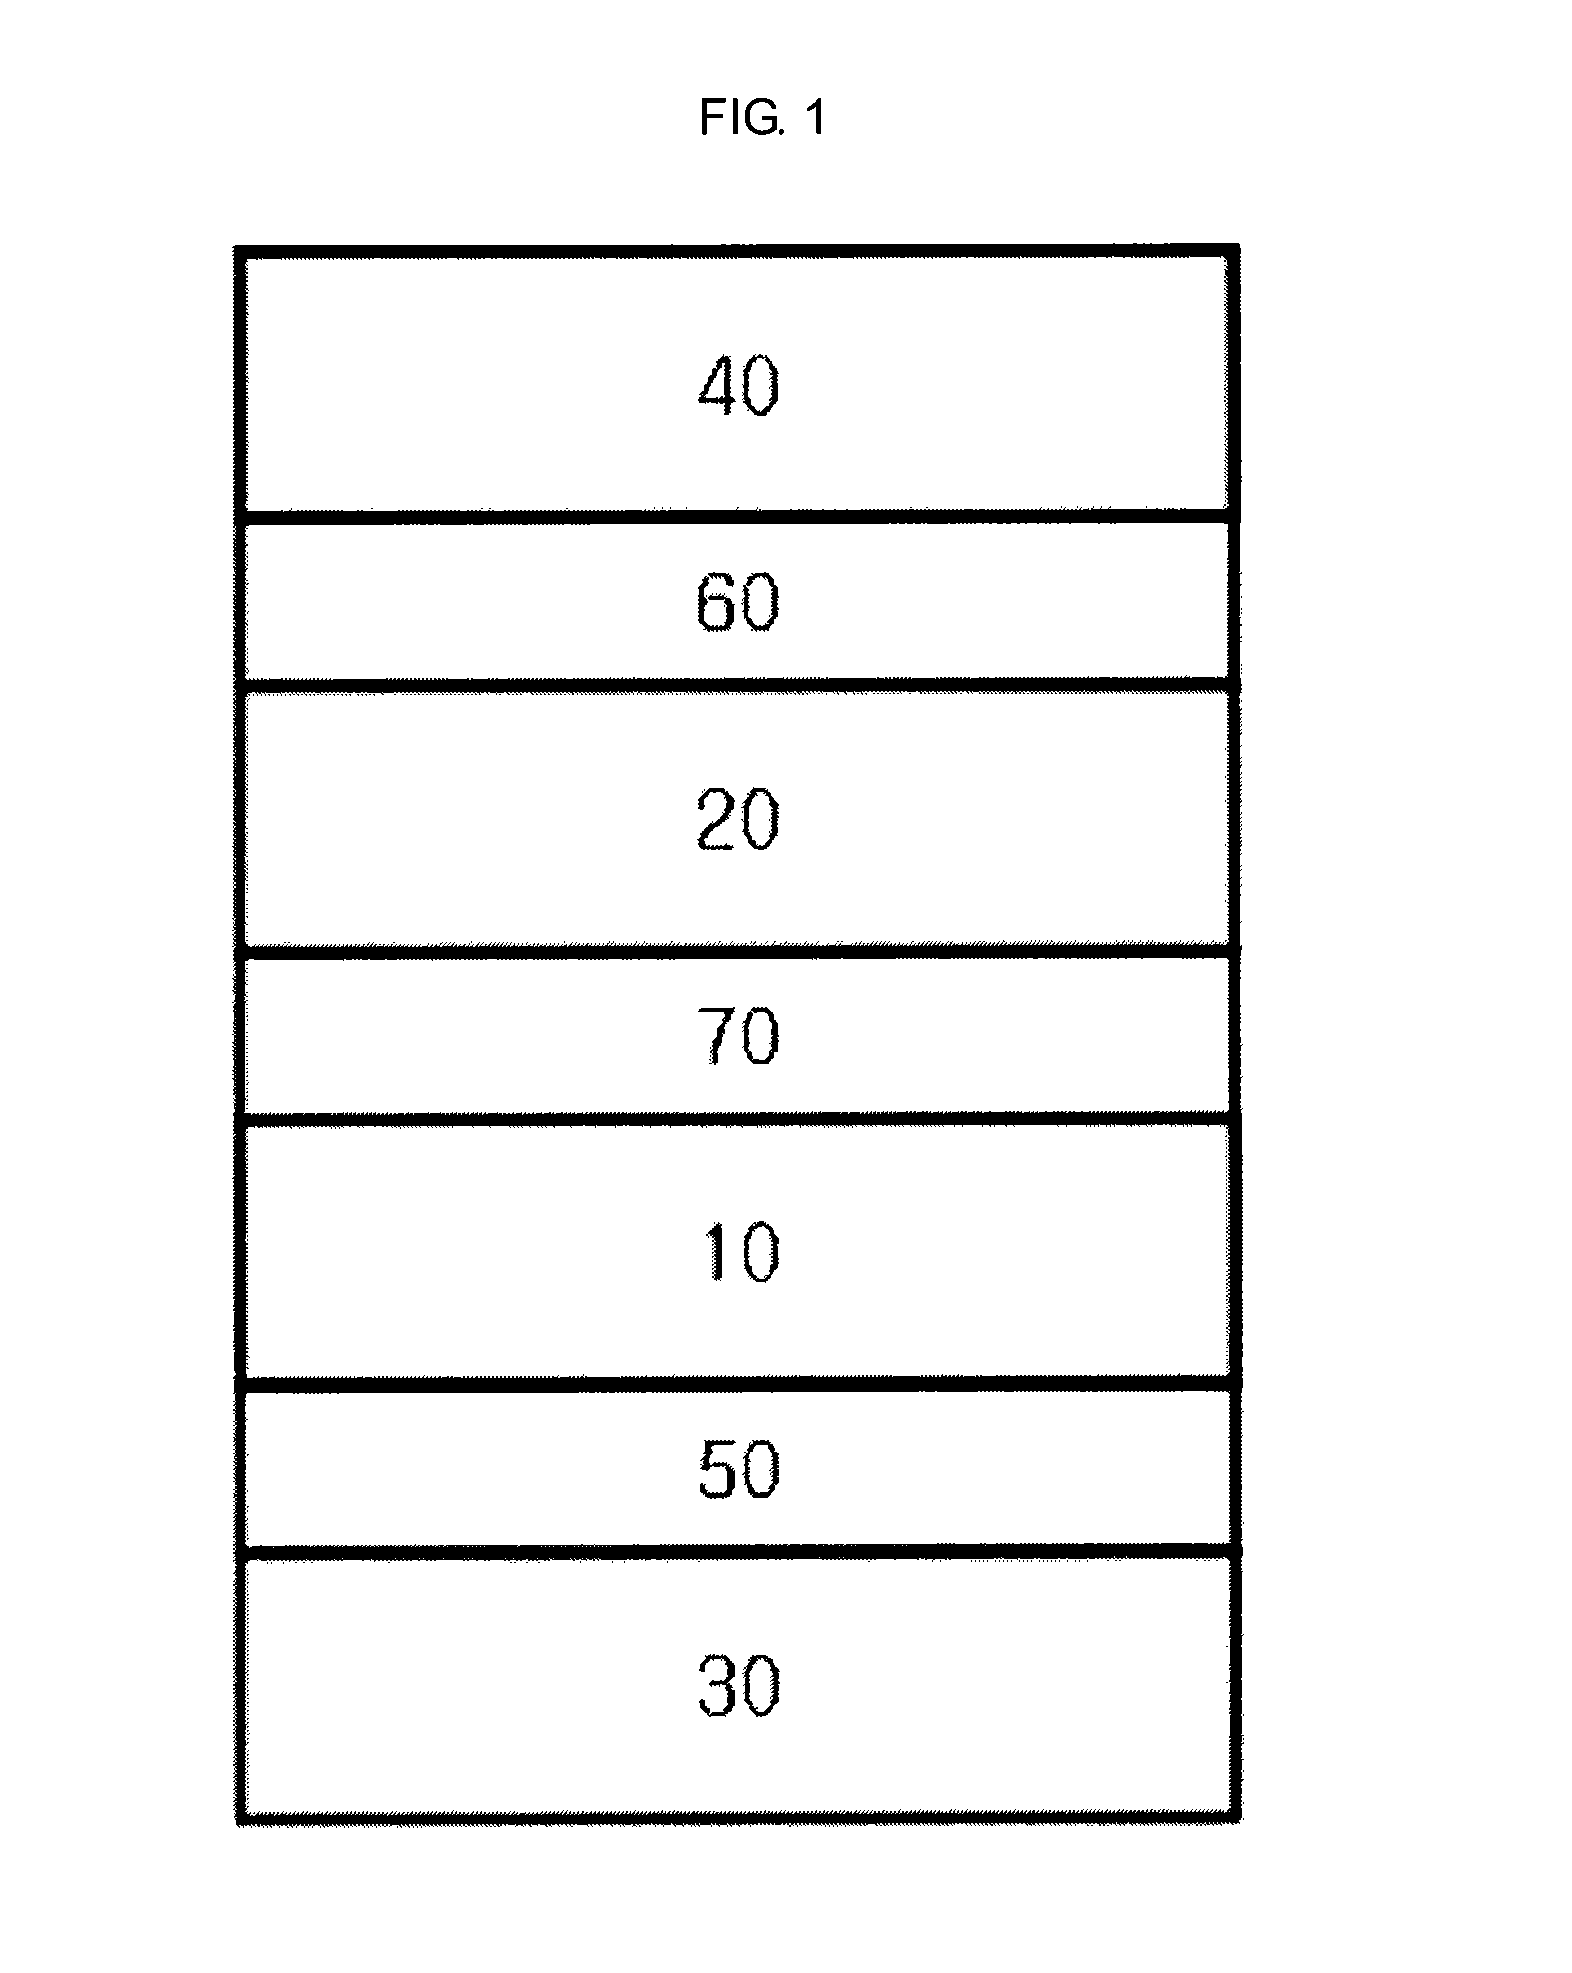 Magnetic tunnel junction structure with perpendicular magnetization layers